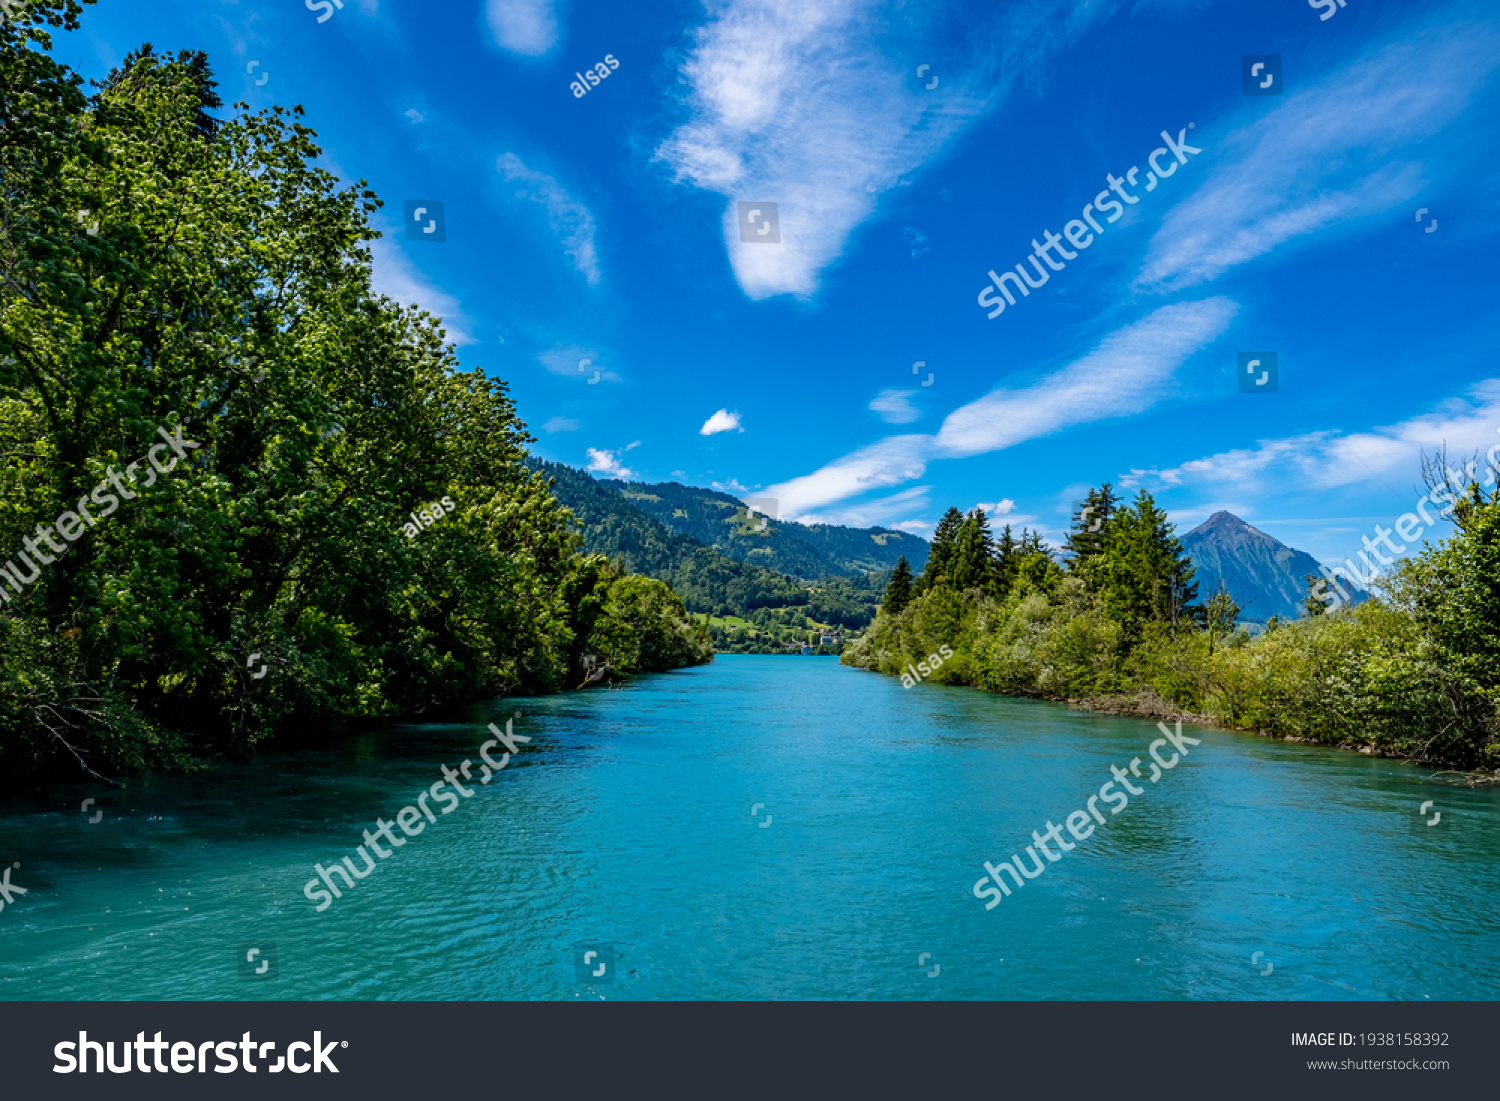 River and mountains with blue sky - Interlaken, Switzerland #1938158392